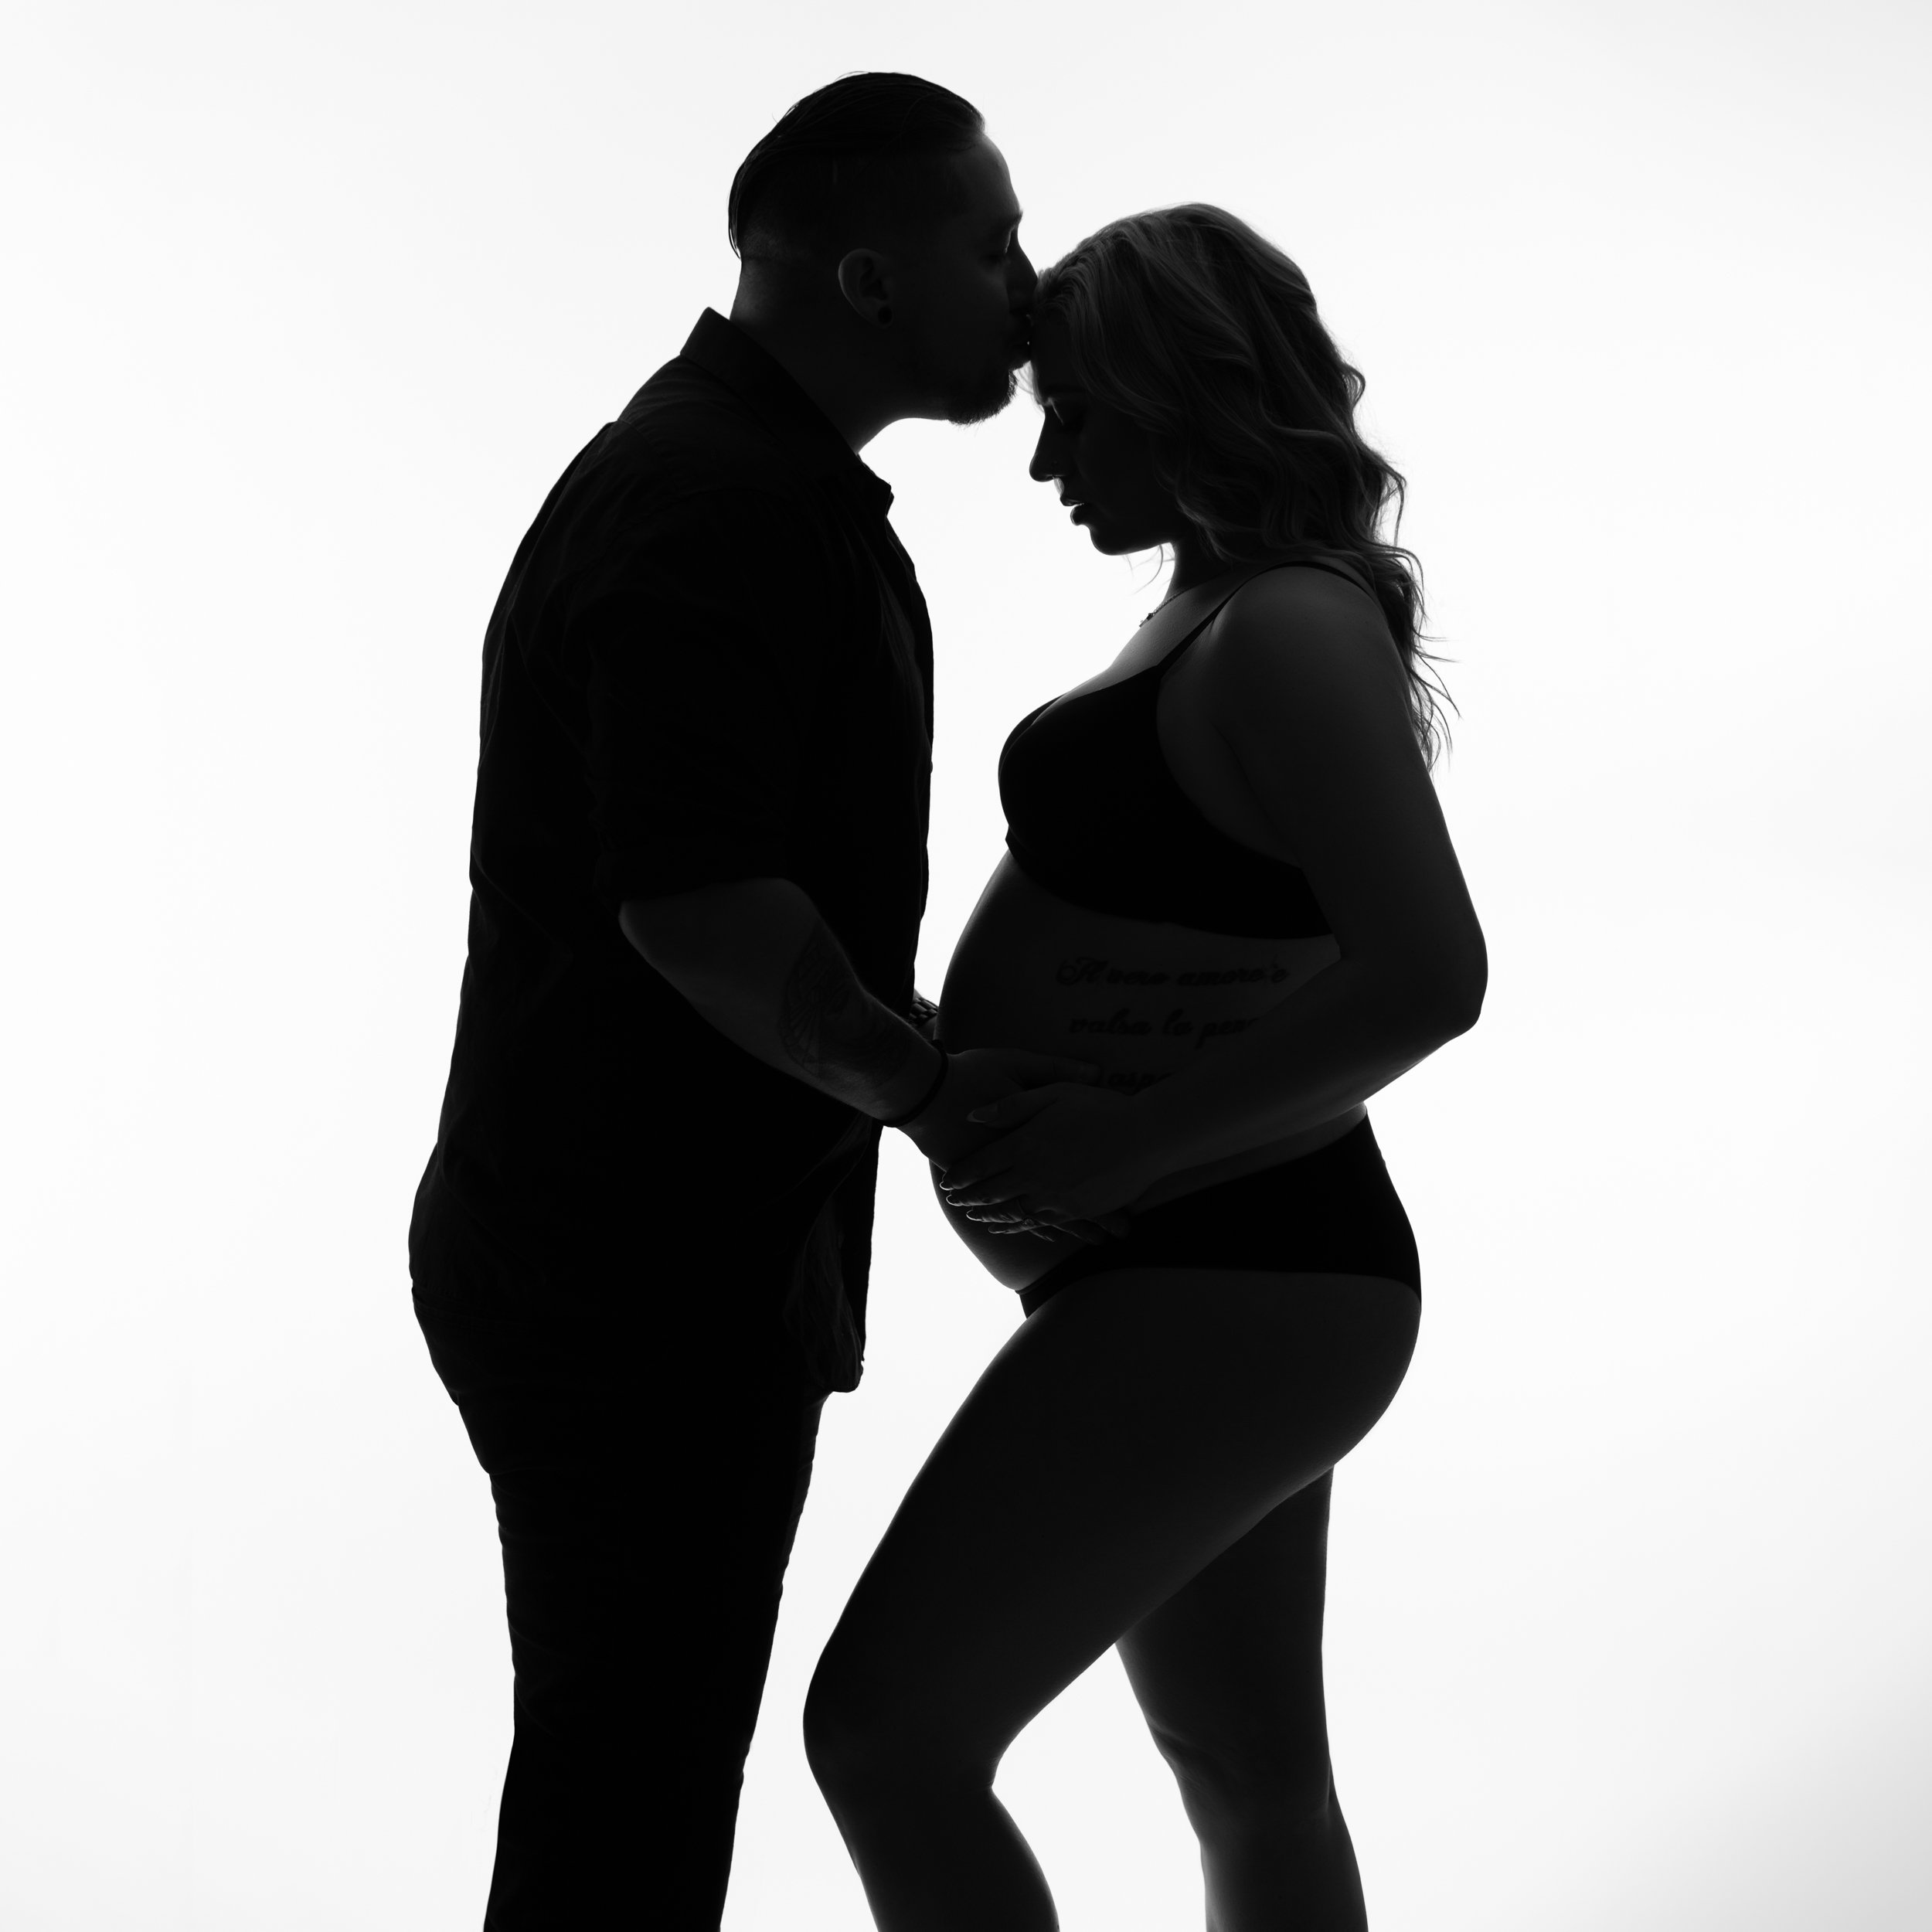 wife-and-husband-embracing-baby-bump-together-in-black-and-white-silhouette.jpg